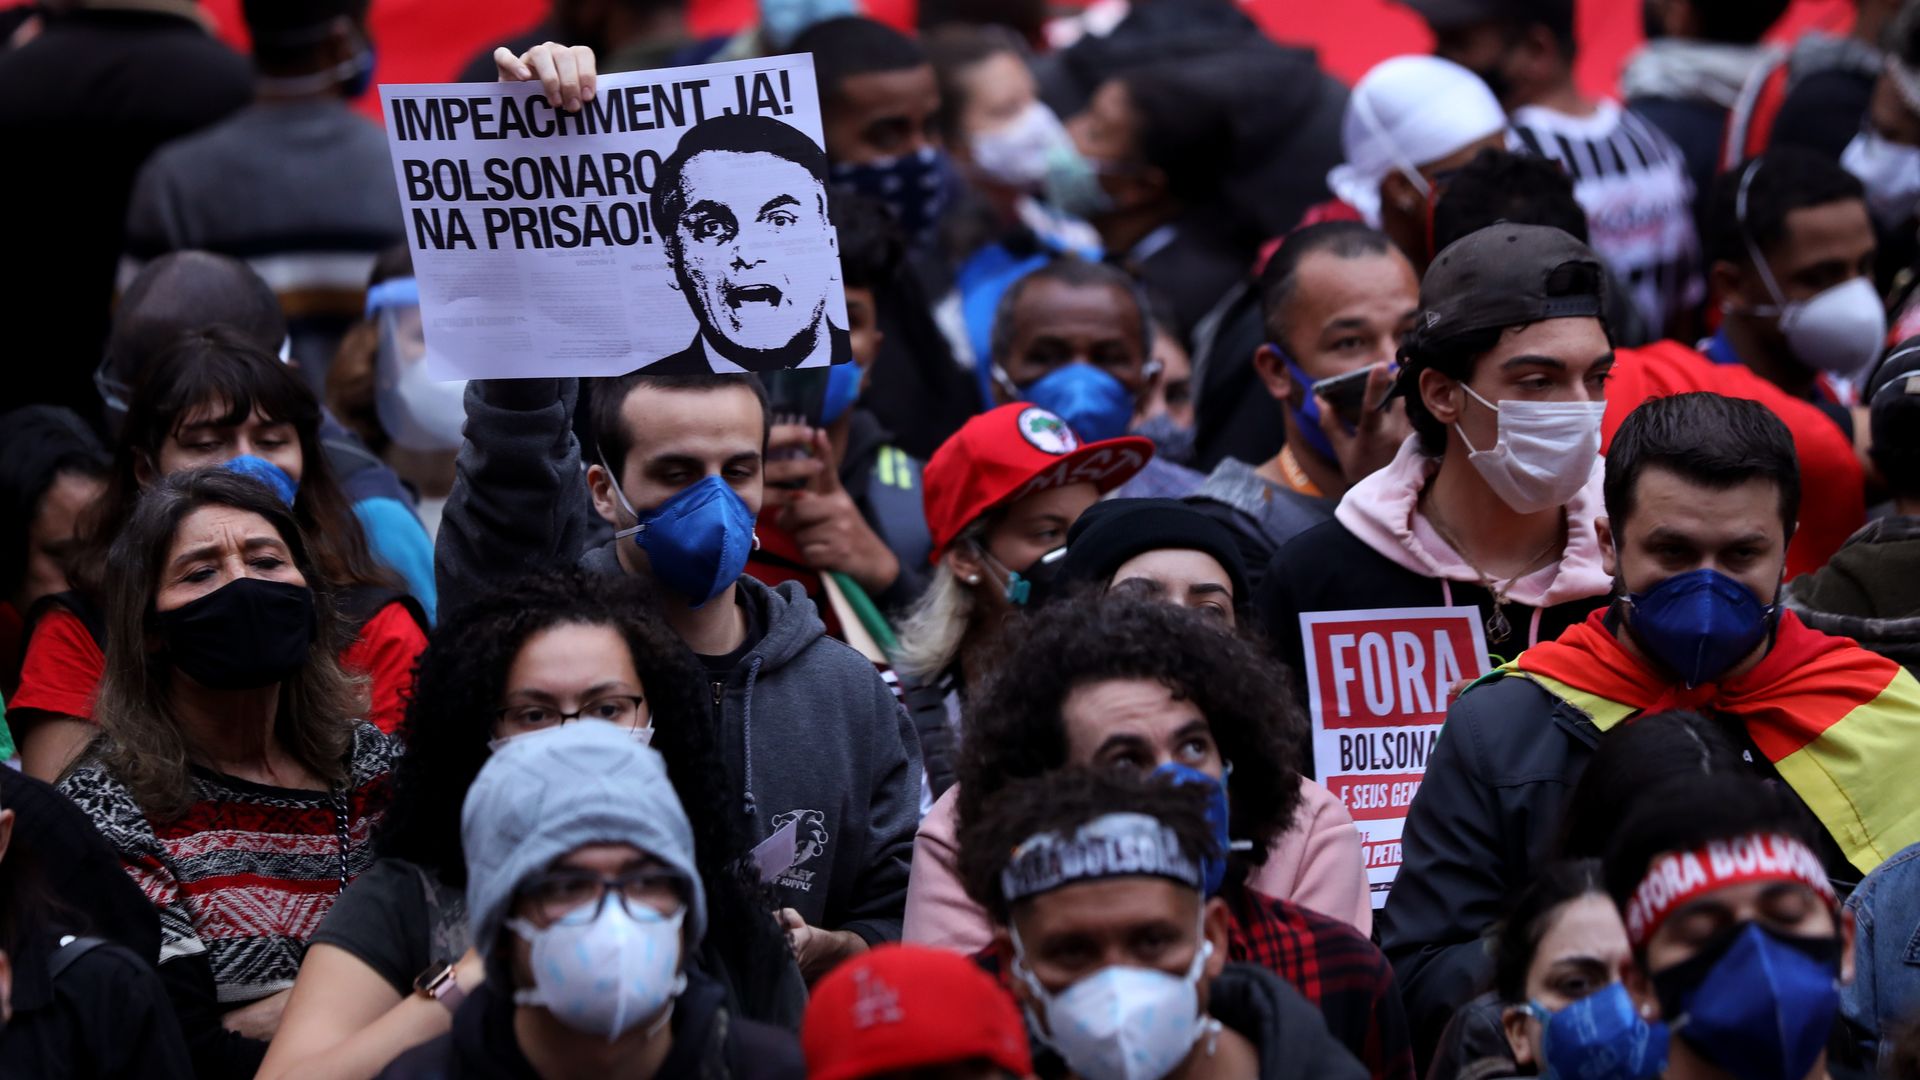 Demonstrators gather holding signs during a protest against Bolsonaro's administration on June 19, 2021 in Sao Paulo, Brazil. 